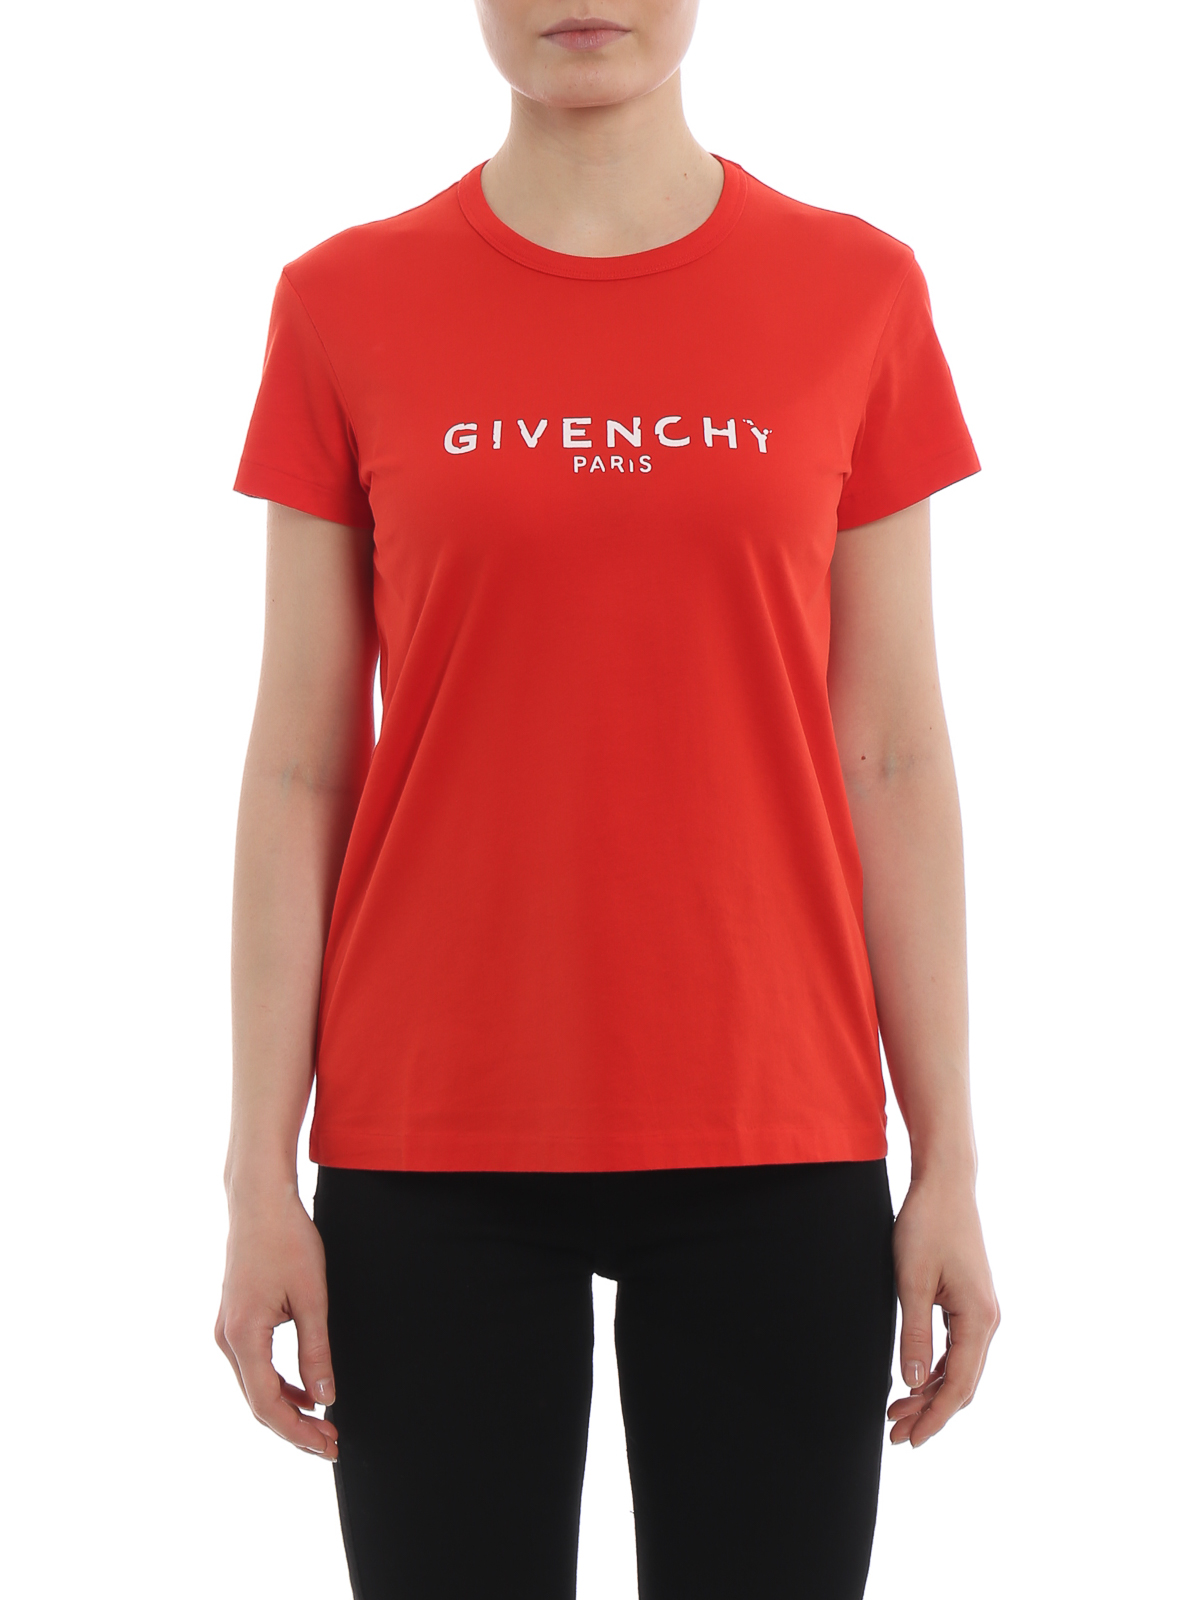 Givenchy - Fading logo print red cotton 